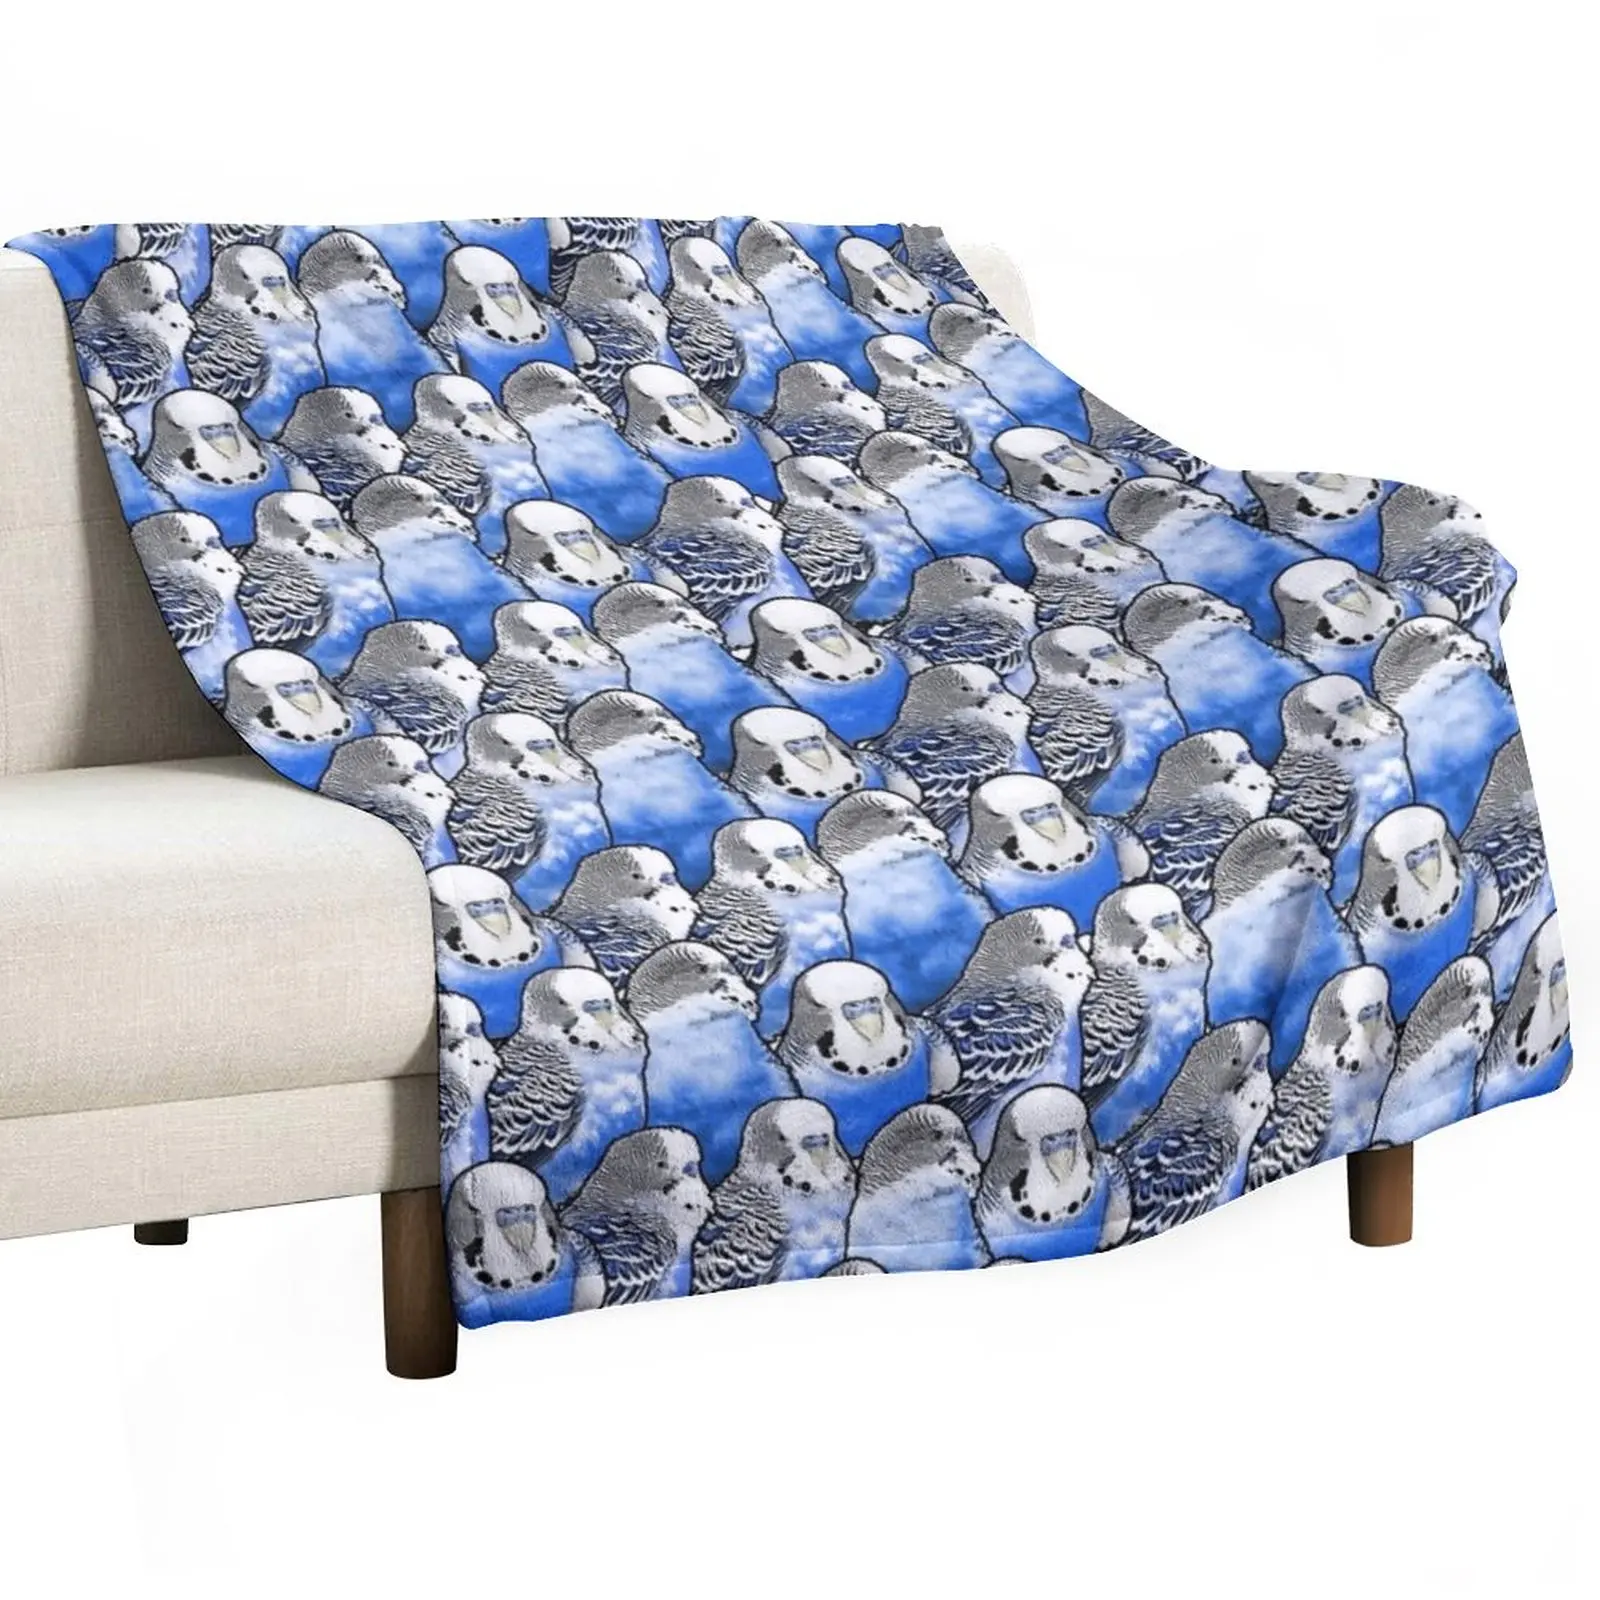 

Budgie Blue Pattern Throw Blanket Hairy Blanket Soft Plush Plaid blankets and blankets Flannels Blanket